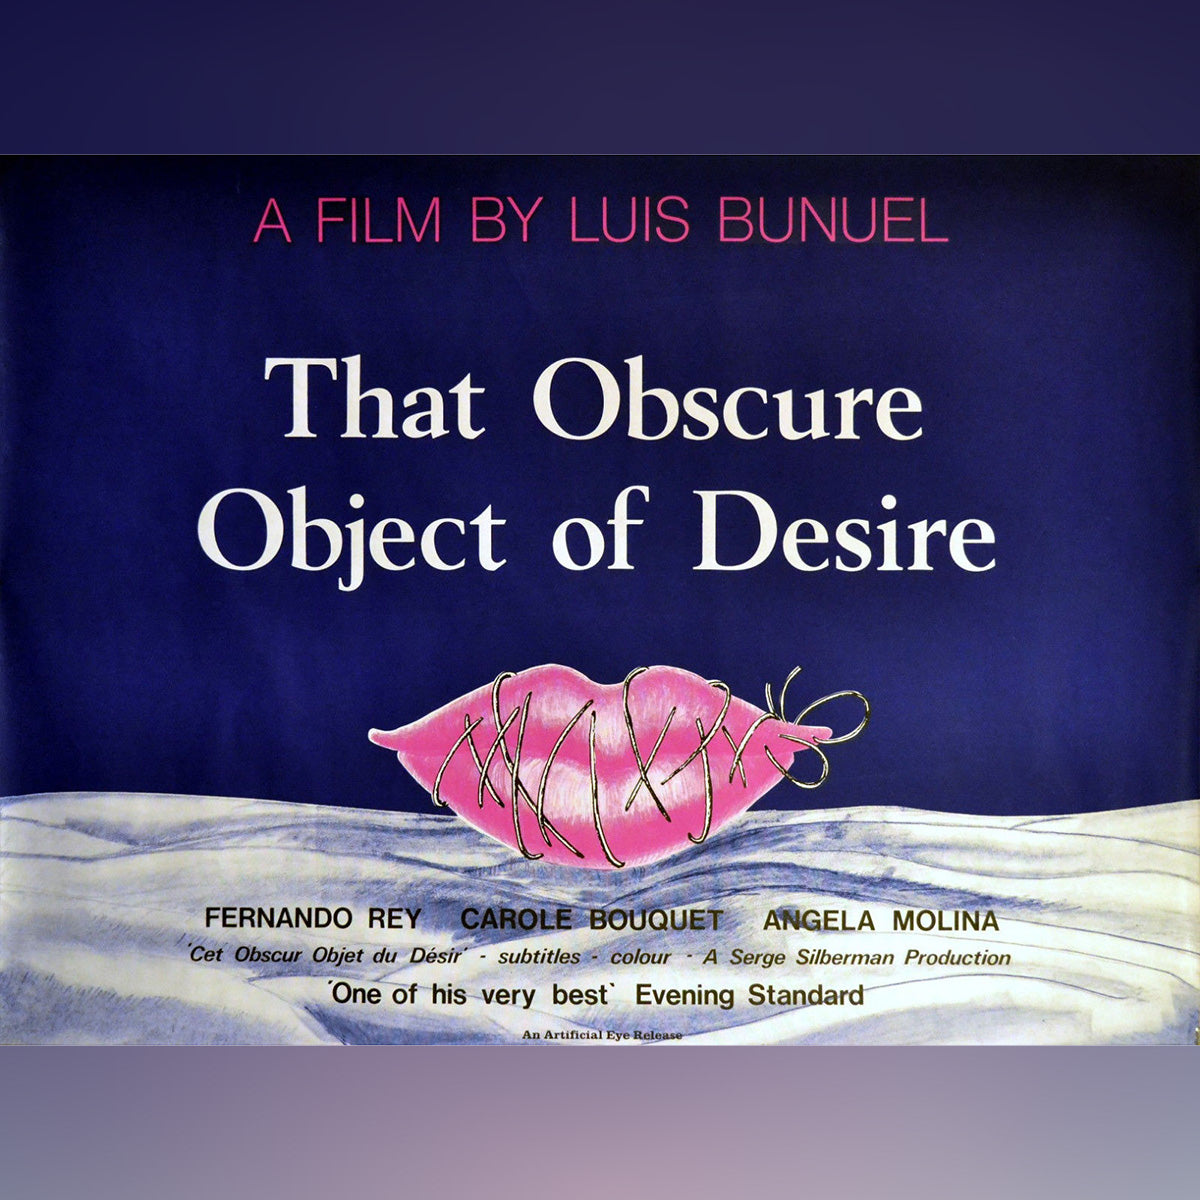 Original Movie Poster of That Obscure Object Of Desire (1977)